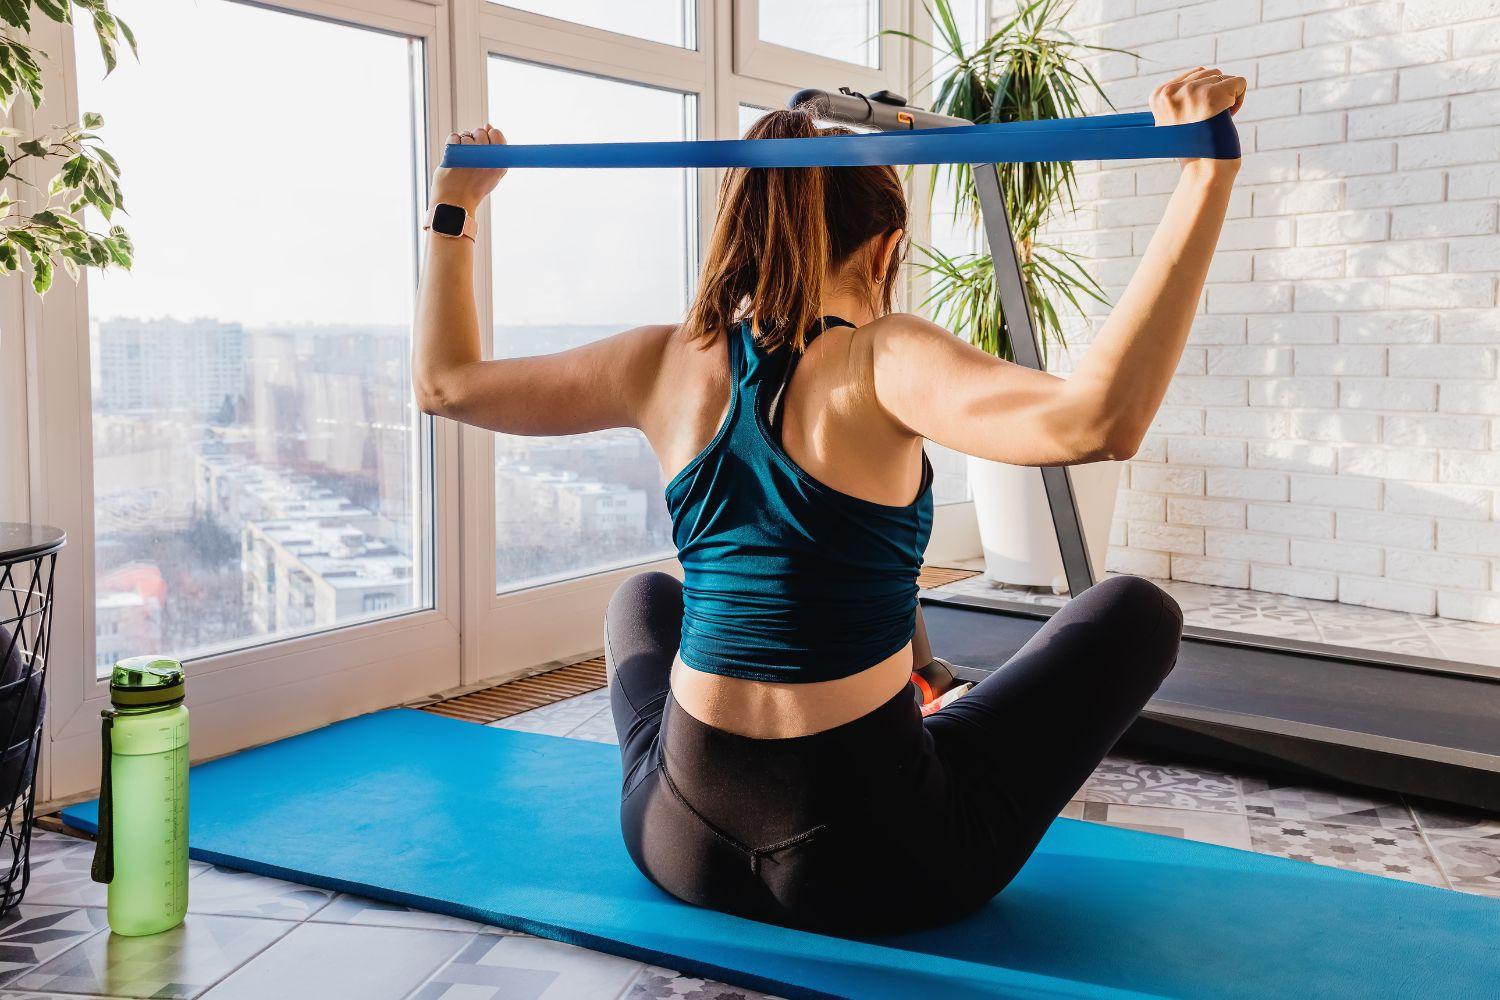 11 Resistance Tube and Band Exercises for Home, Office, or Travel